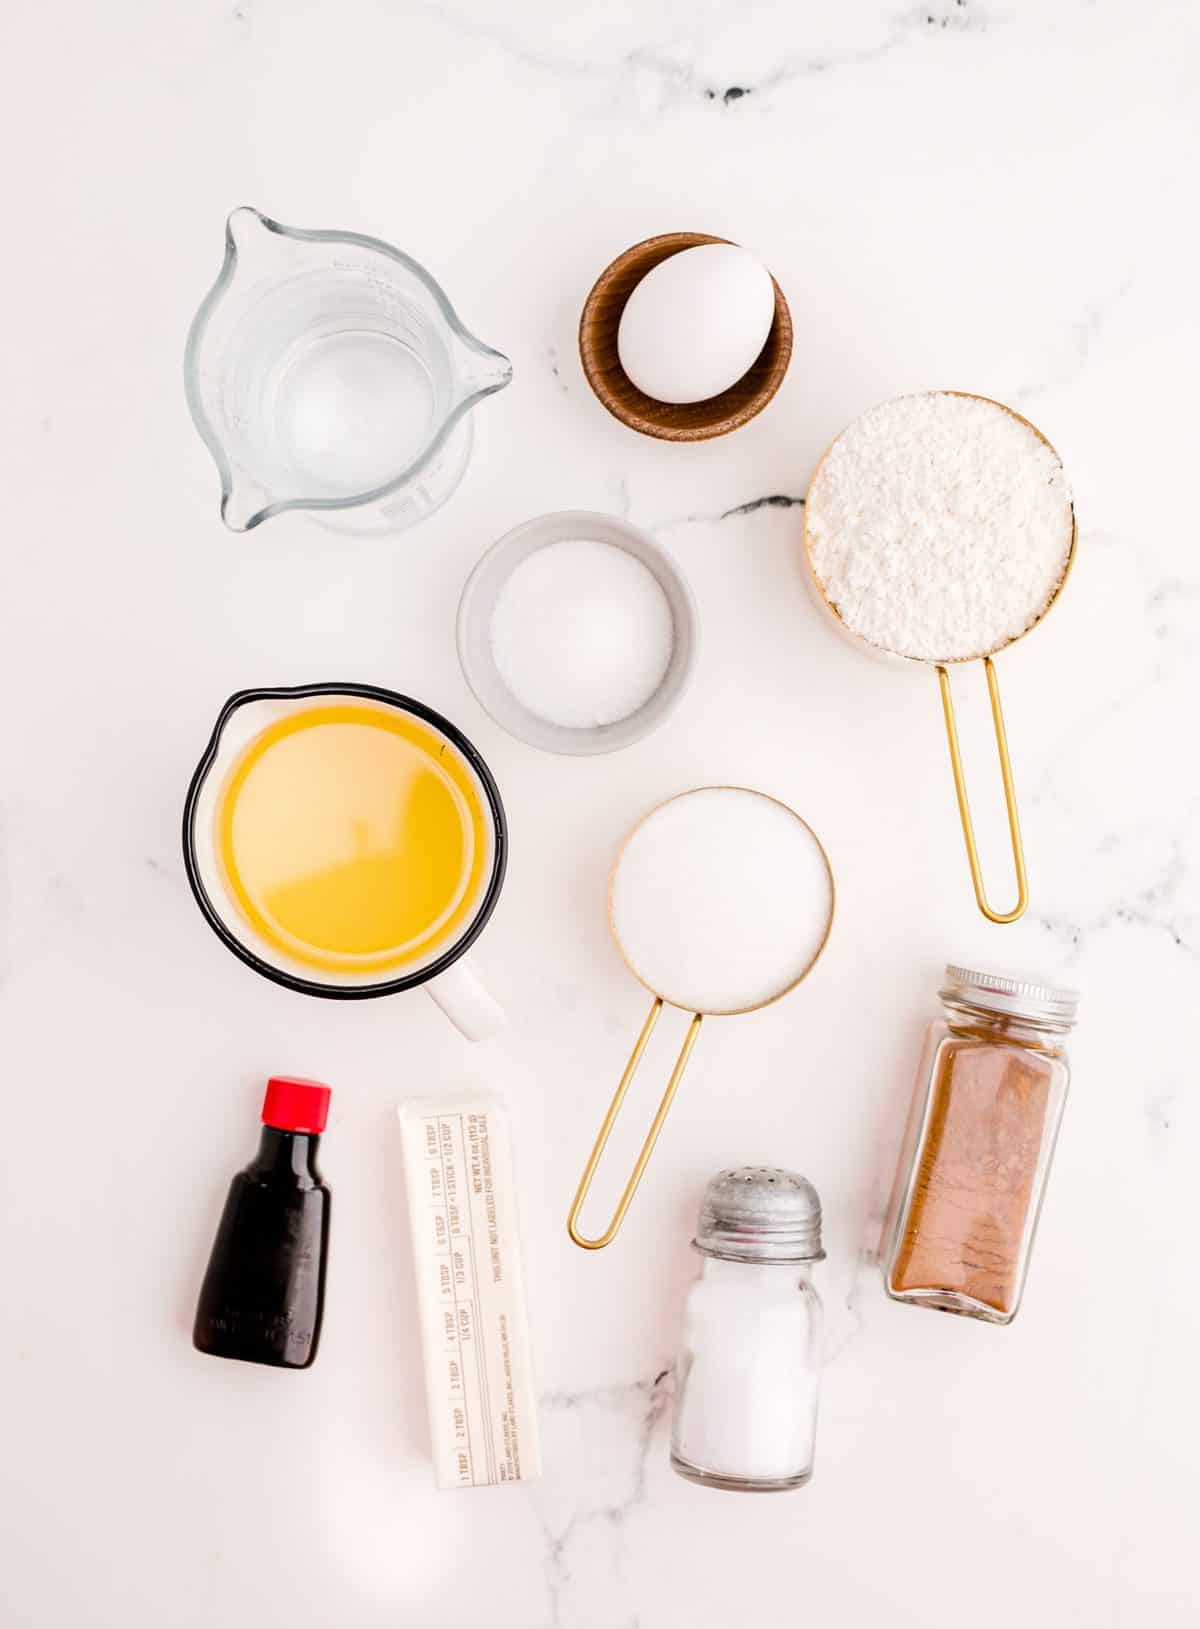 Ingredients to make homemade churros laid out on a white background.